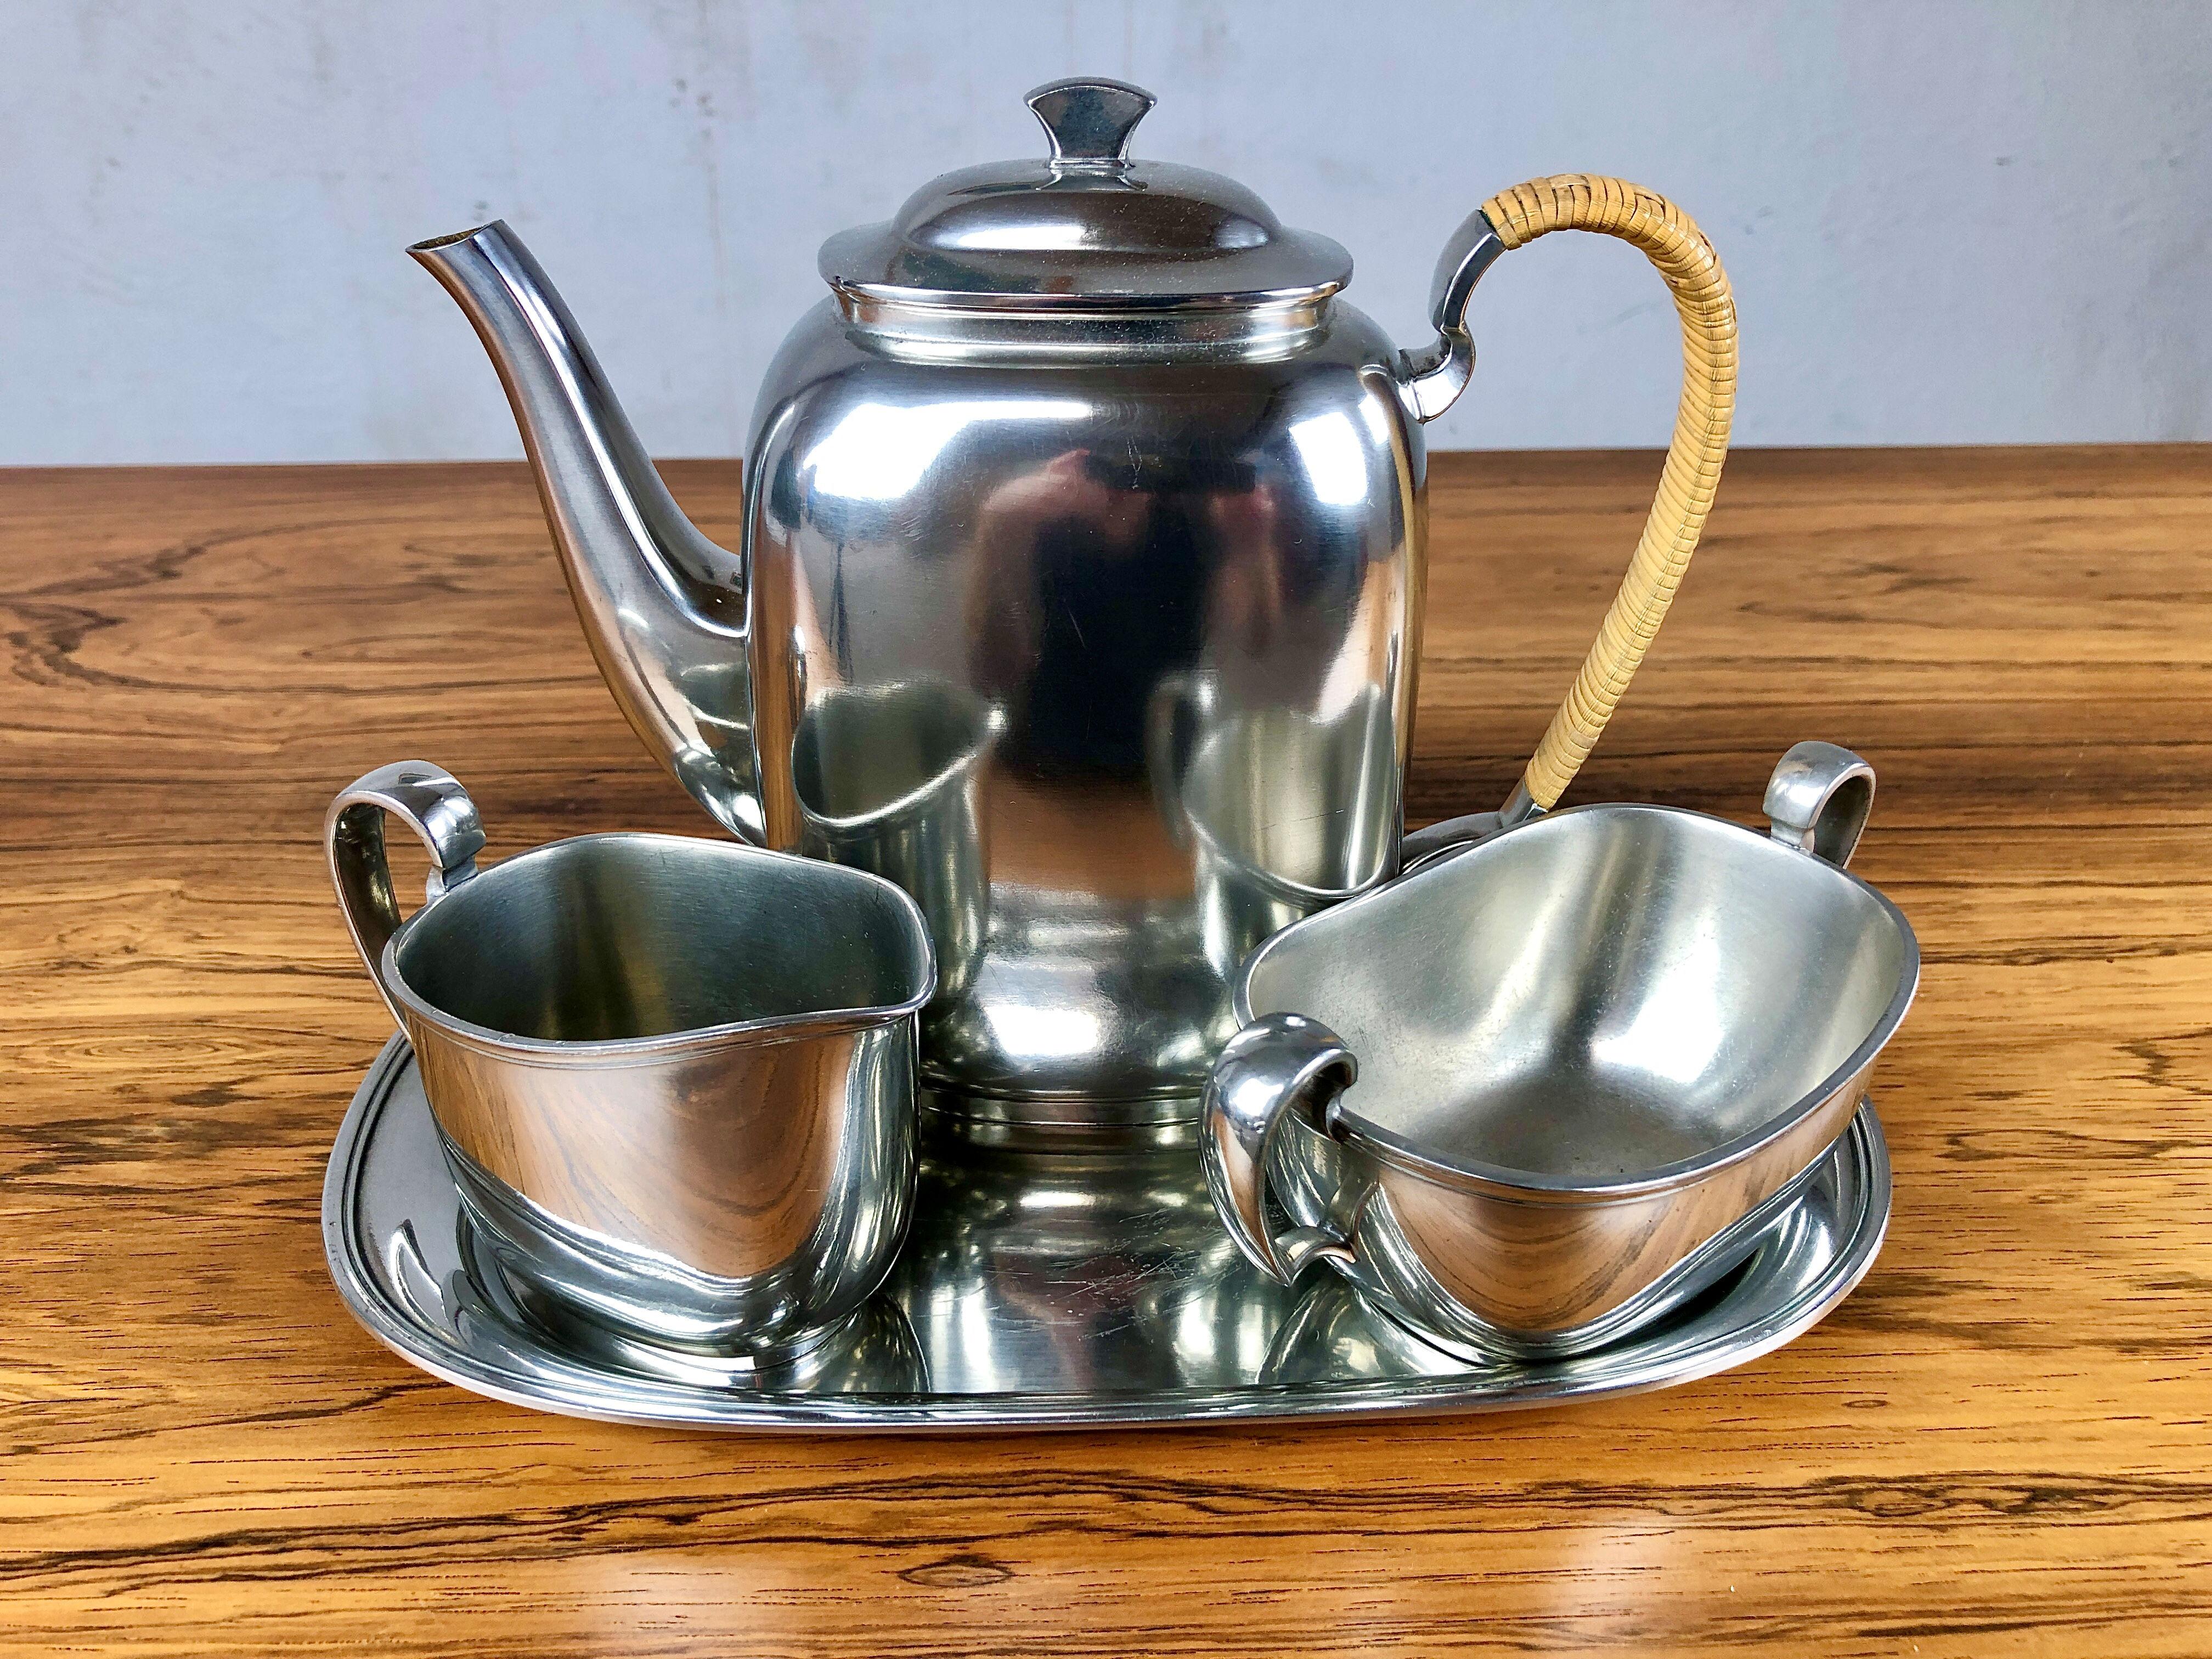 1950s Set of Danish Just Andersen Pewter coffee service 

The set consisting of a coffee pot, creamer, sugar bowl and a tray all marked with Just Andersens triangle mark is in good vintage condition.

Sizes cm/in:
Coffe pot: H: 17 / 6.69 D: 9 /